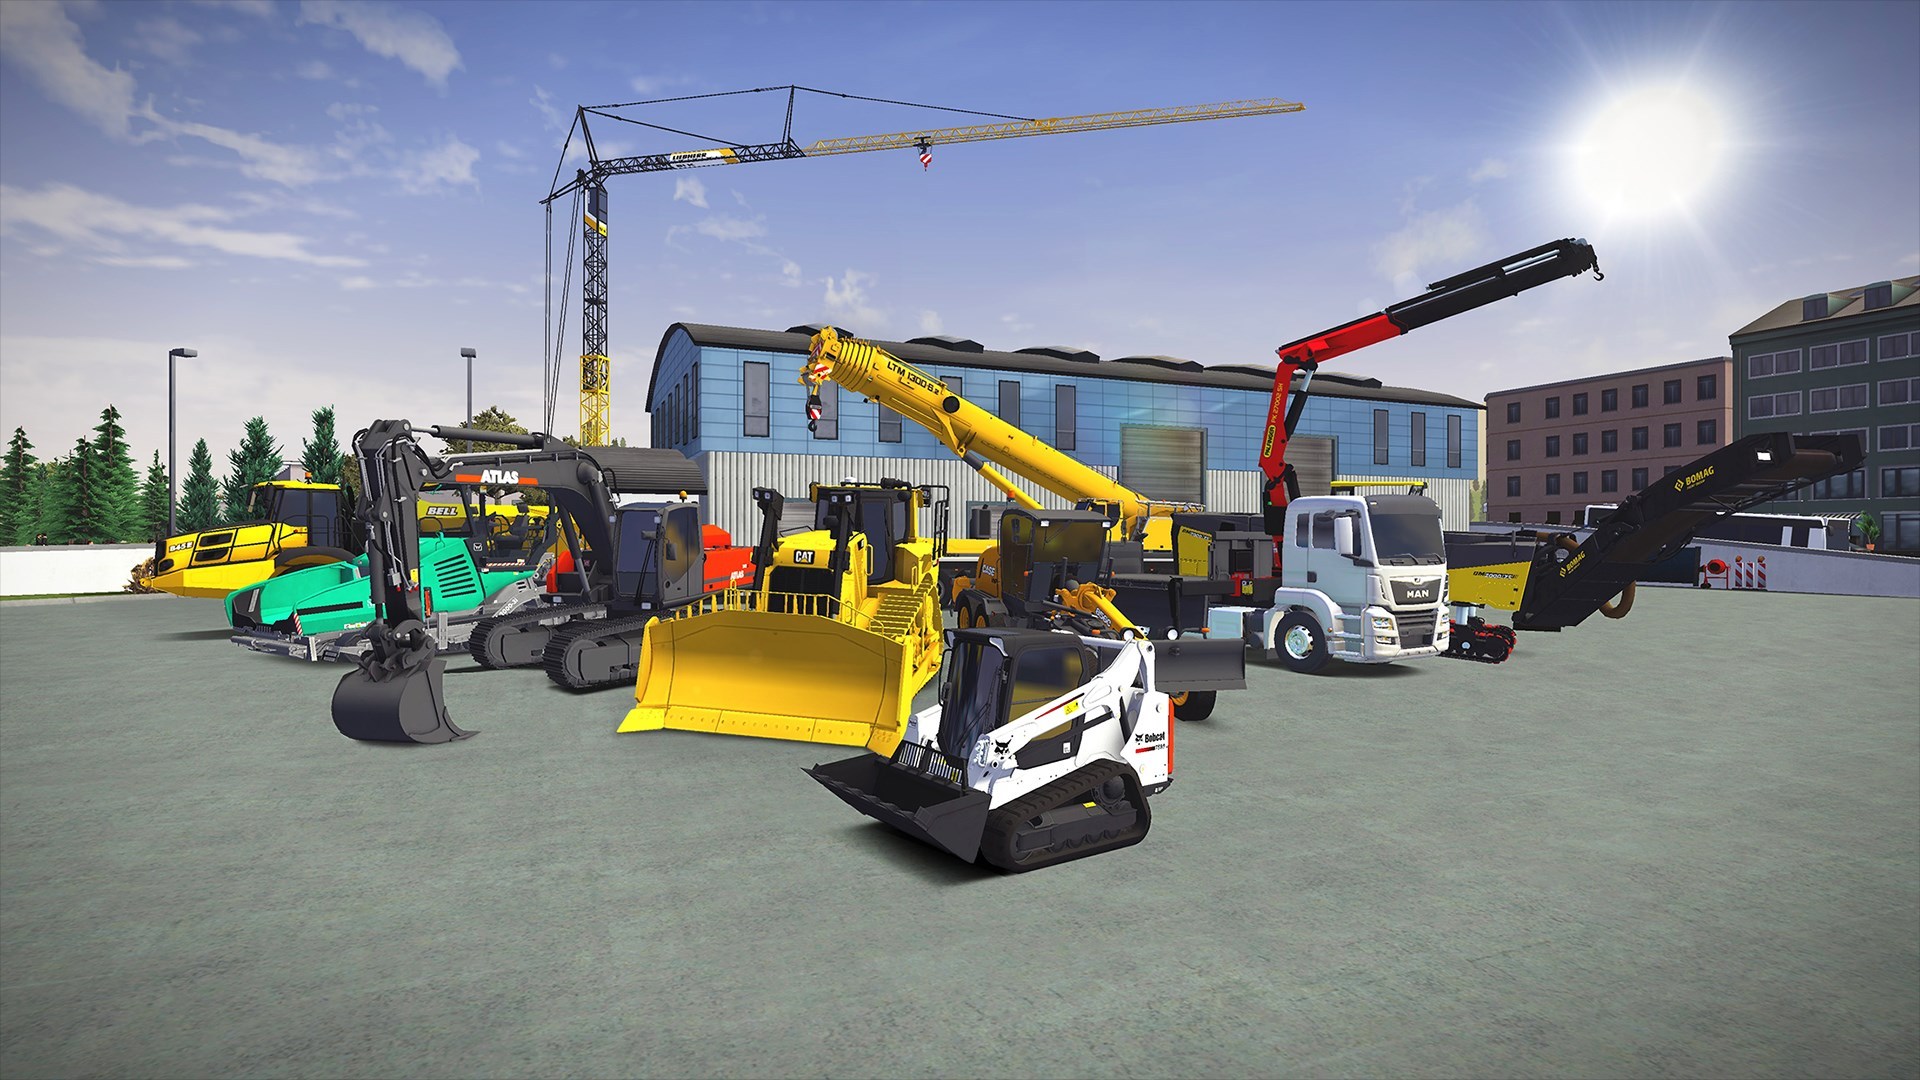 codes for construction simulator 2019